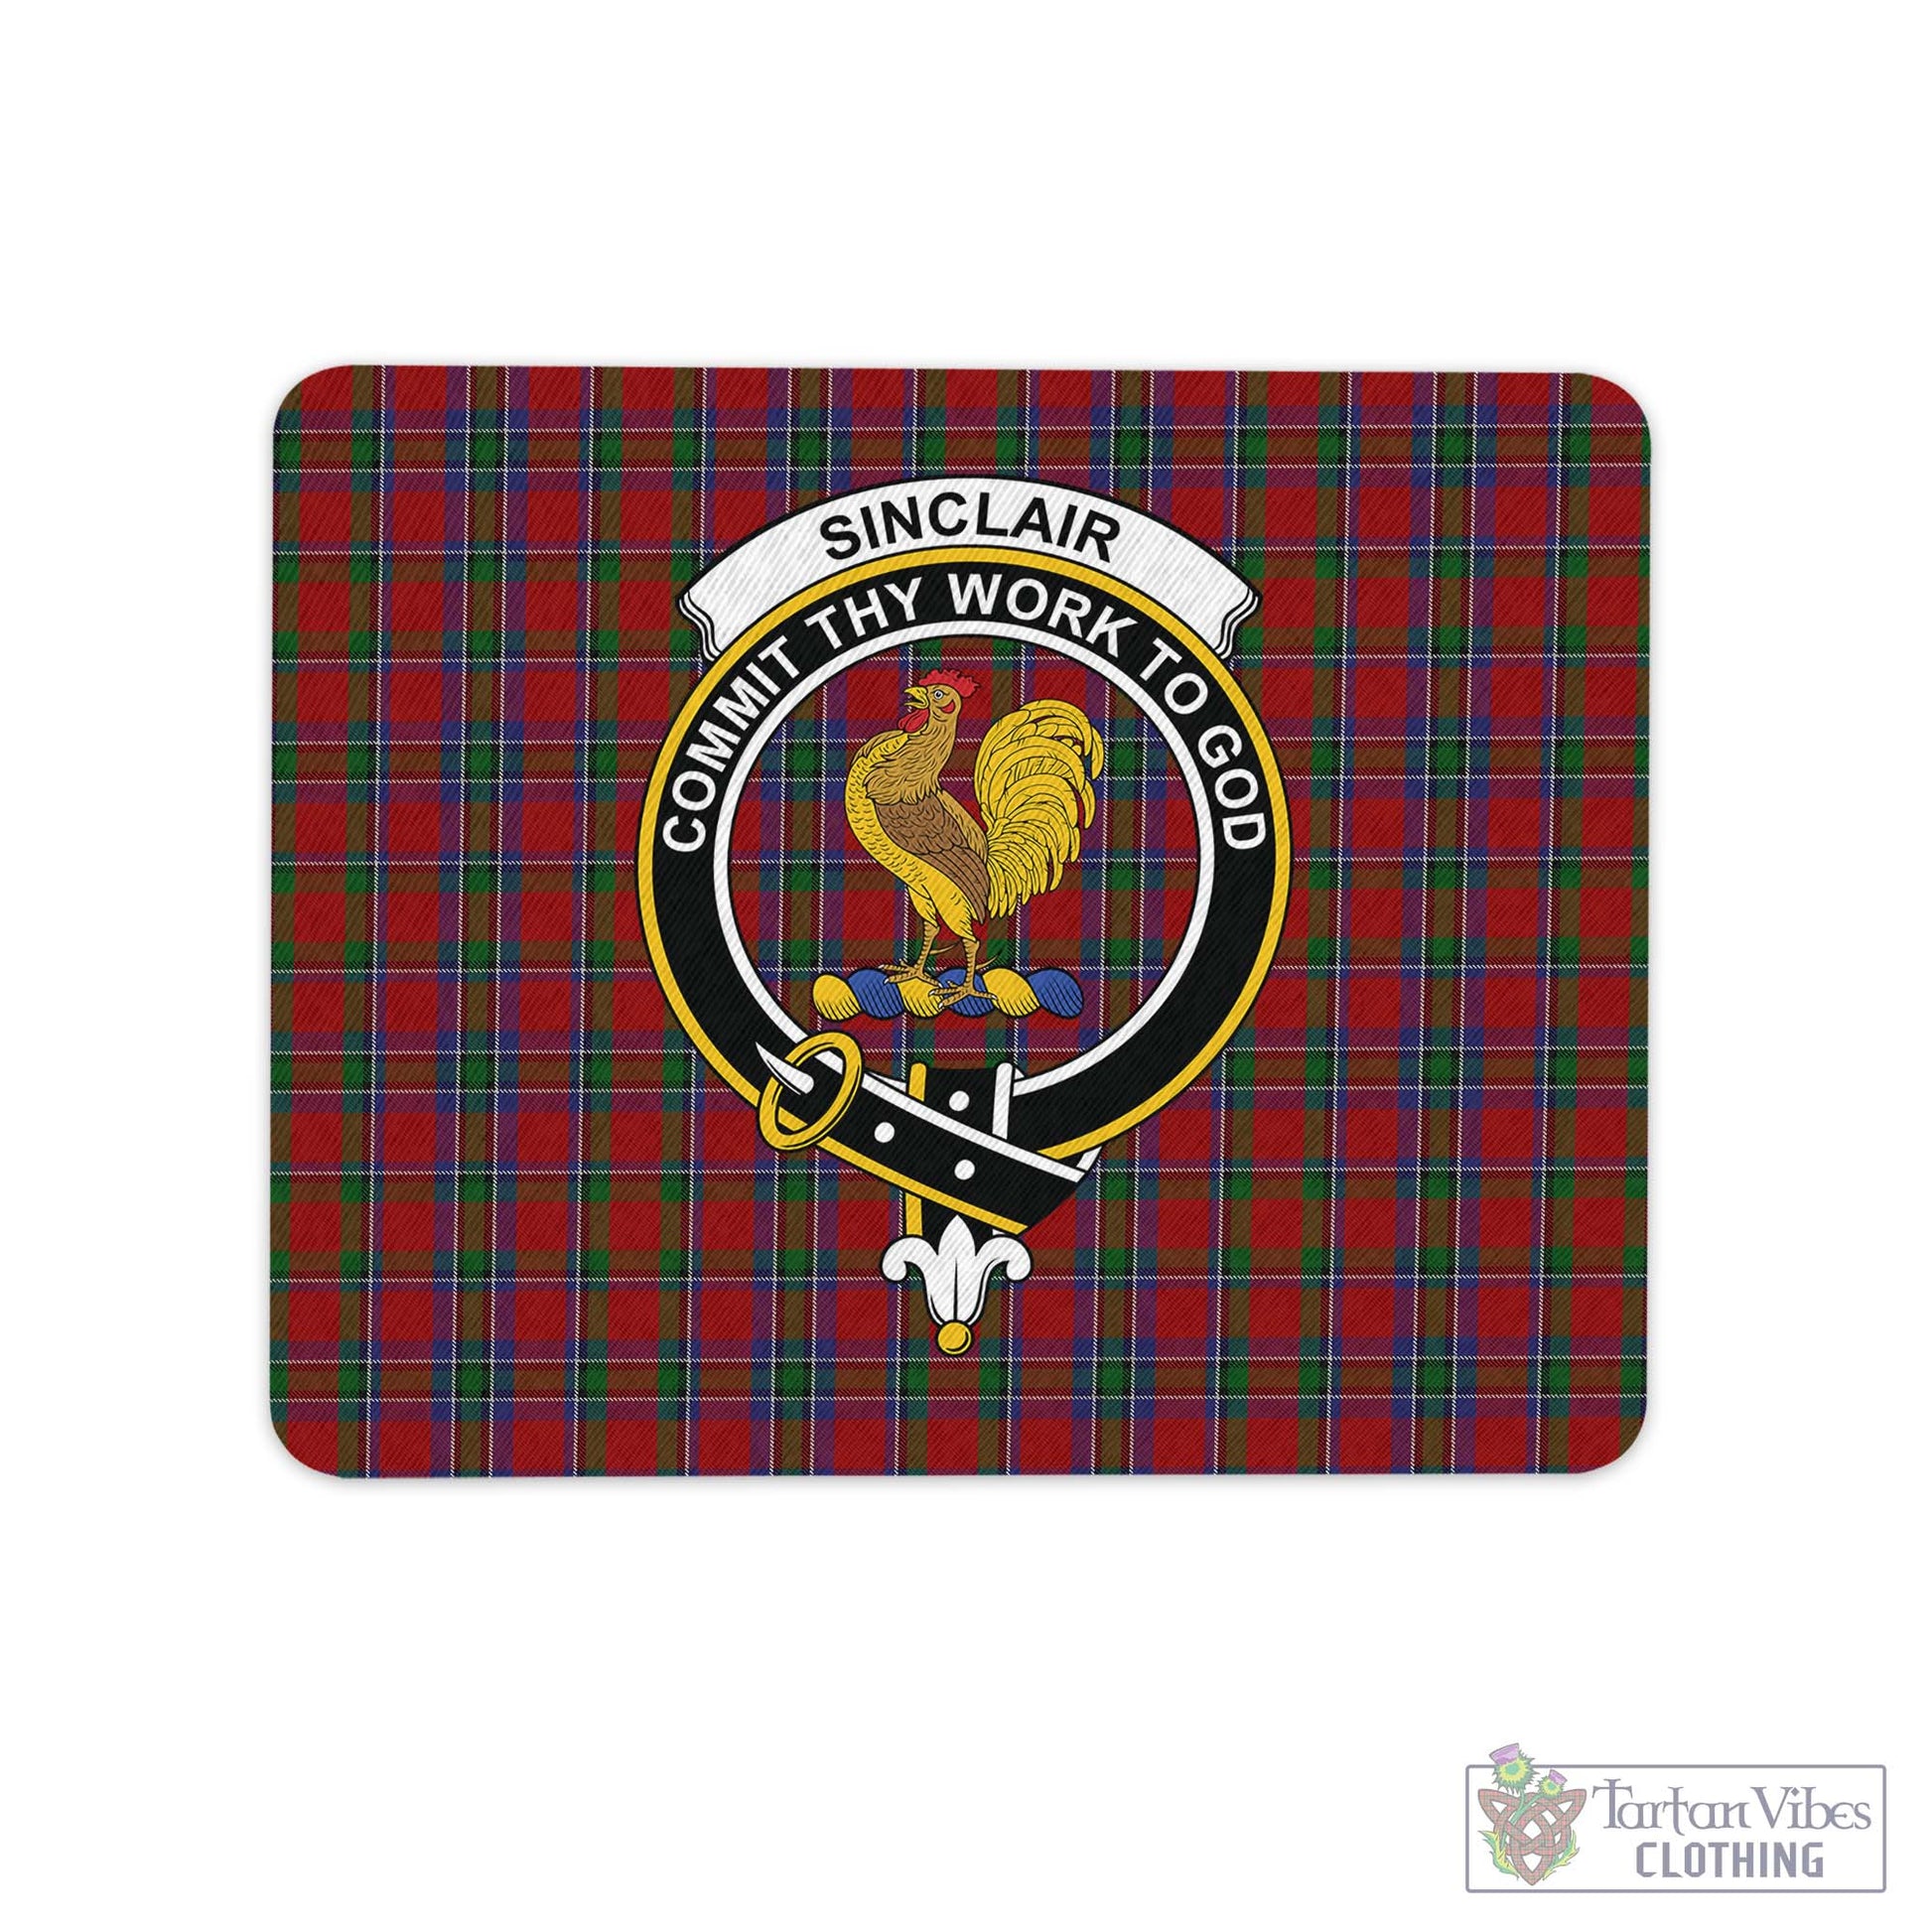 Tartan Vibes Clothing Sinclair Tartan Mouse Pad with Family Crest